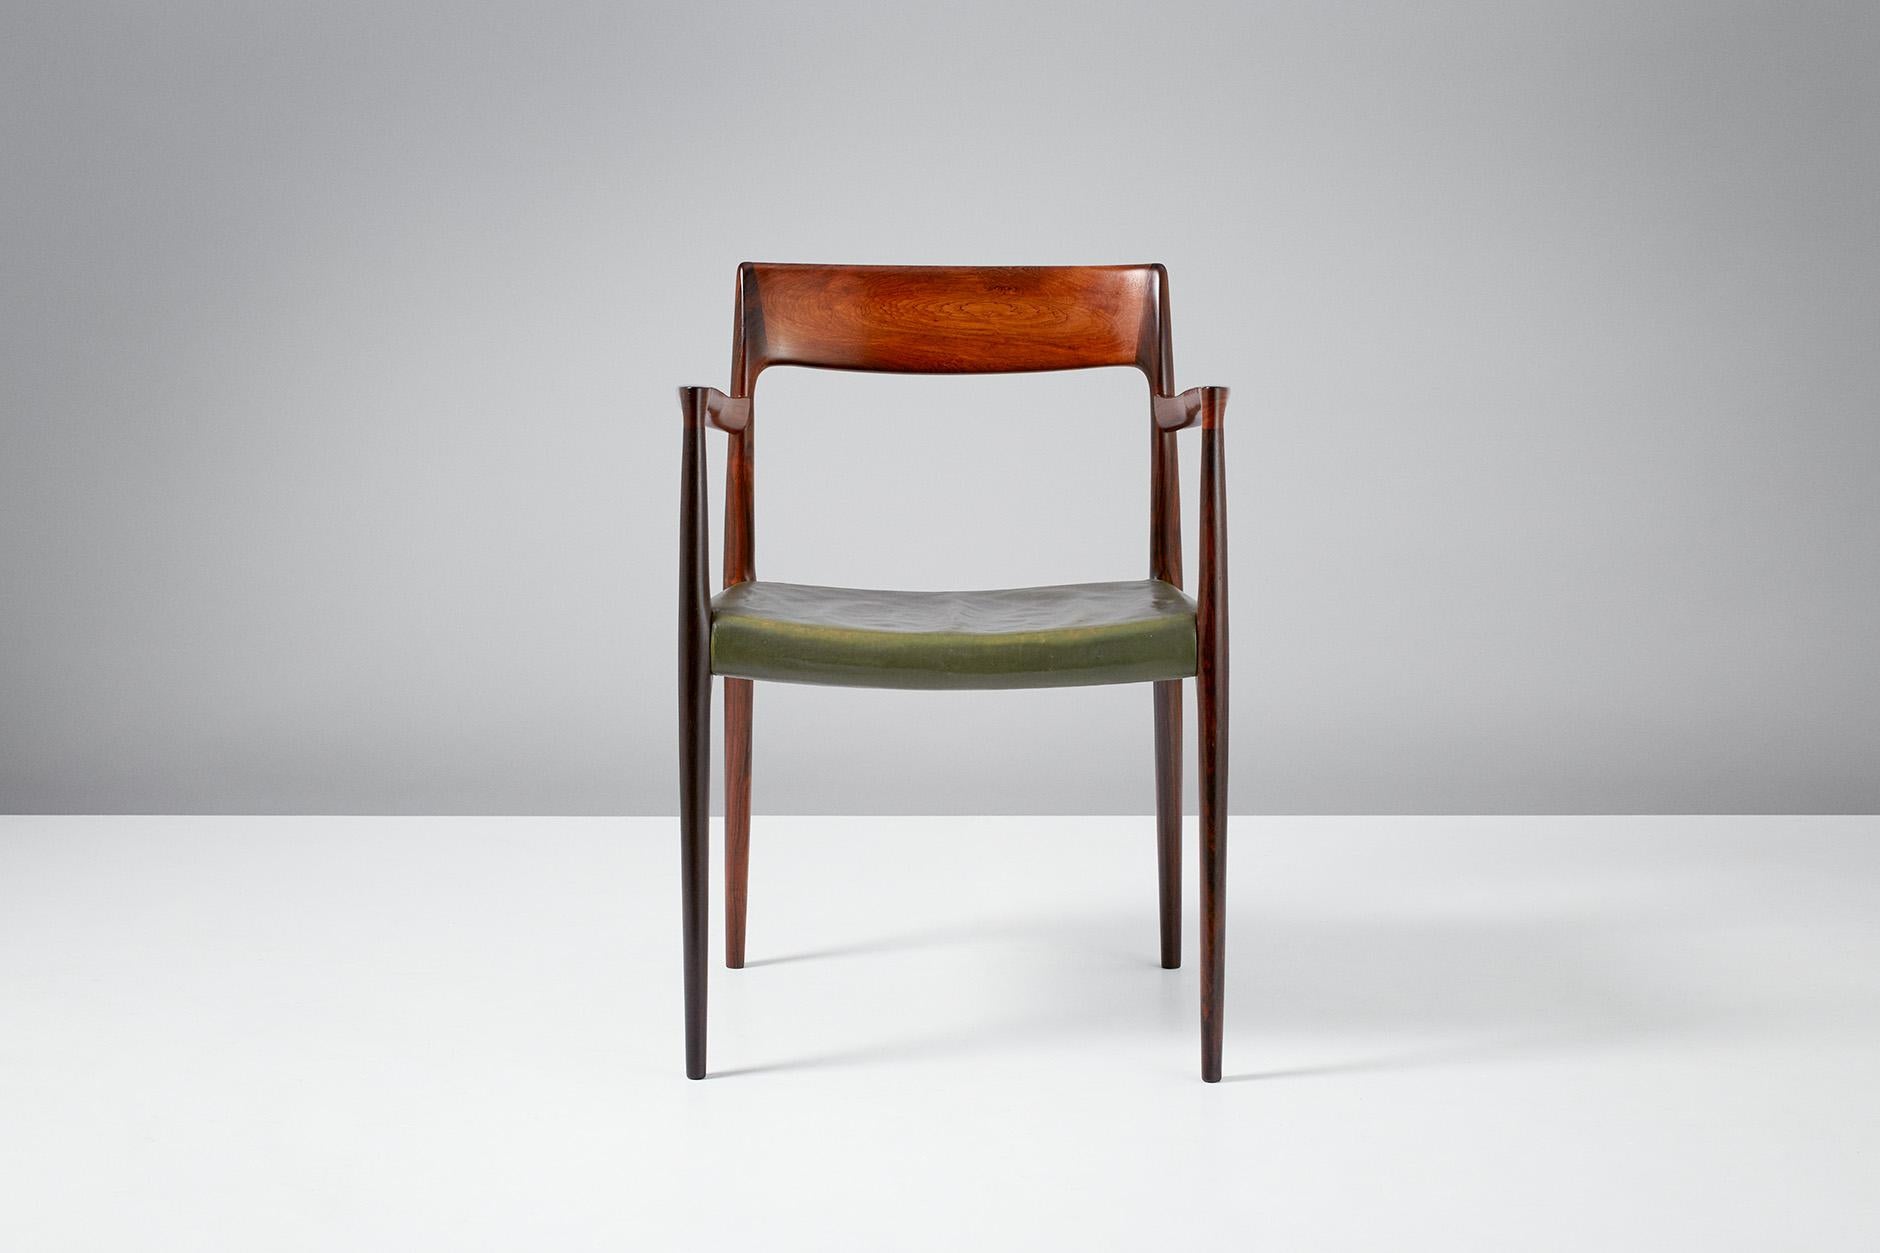 Niels O. Moller

Model 57 chair 

Solid rosewood armchair produced by J.L. Moller Mobelfabrik, Denmark, 1959. Original, patinated green leather seat.

Measures: H 77 cm / D 50 cm / W 55 cm / SH 44 cm.